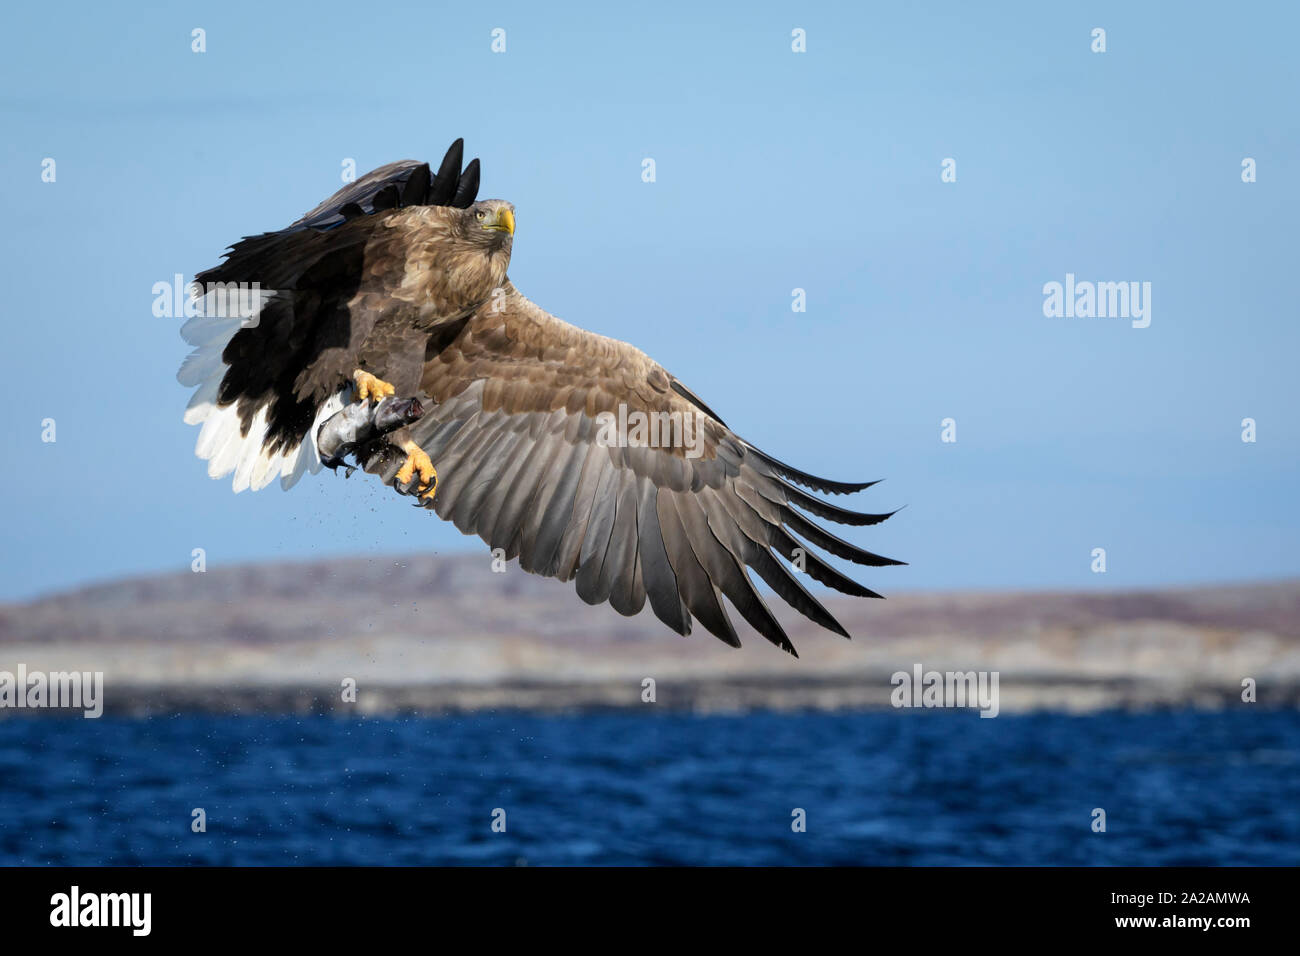 White-tailed sea eagle (Haliaeetus albicilla) in flight with caught fish, looking at camera, Flatanger, Norway Stock Photo